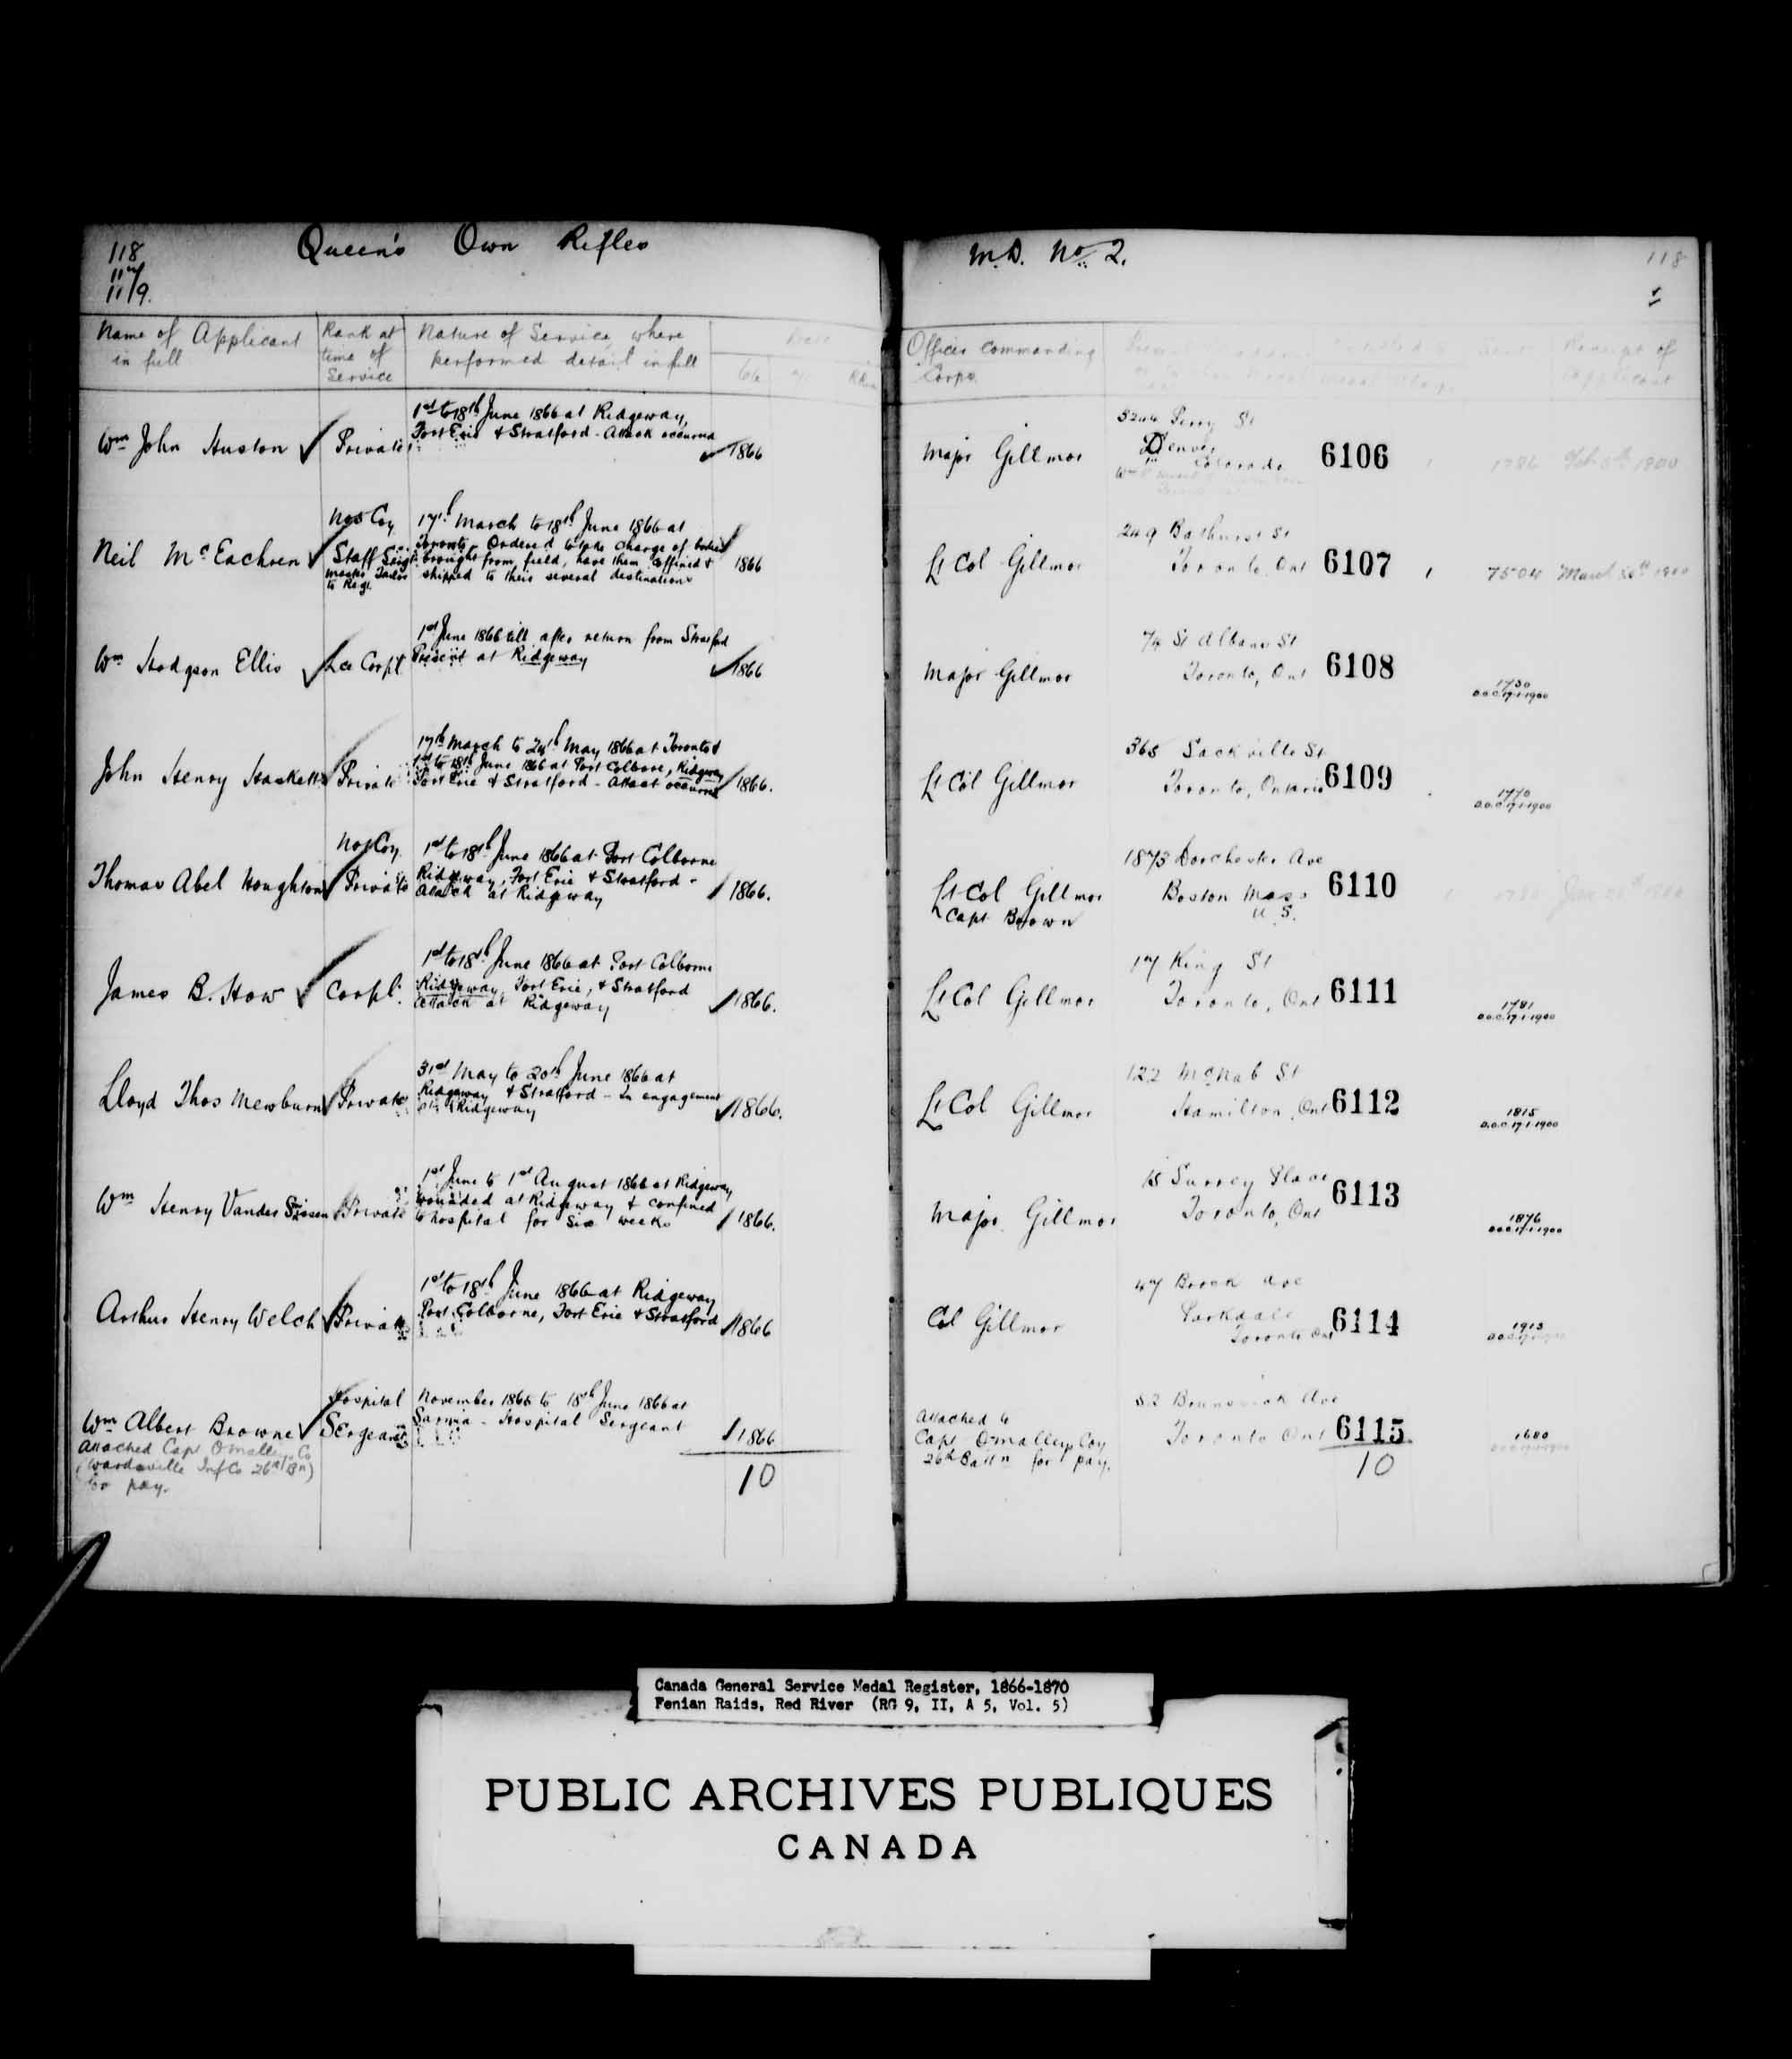 Digitized page of Medals, Honours and Awards for Image No.: e008682178